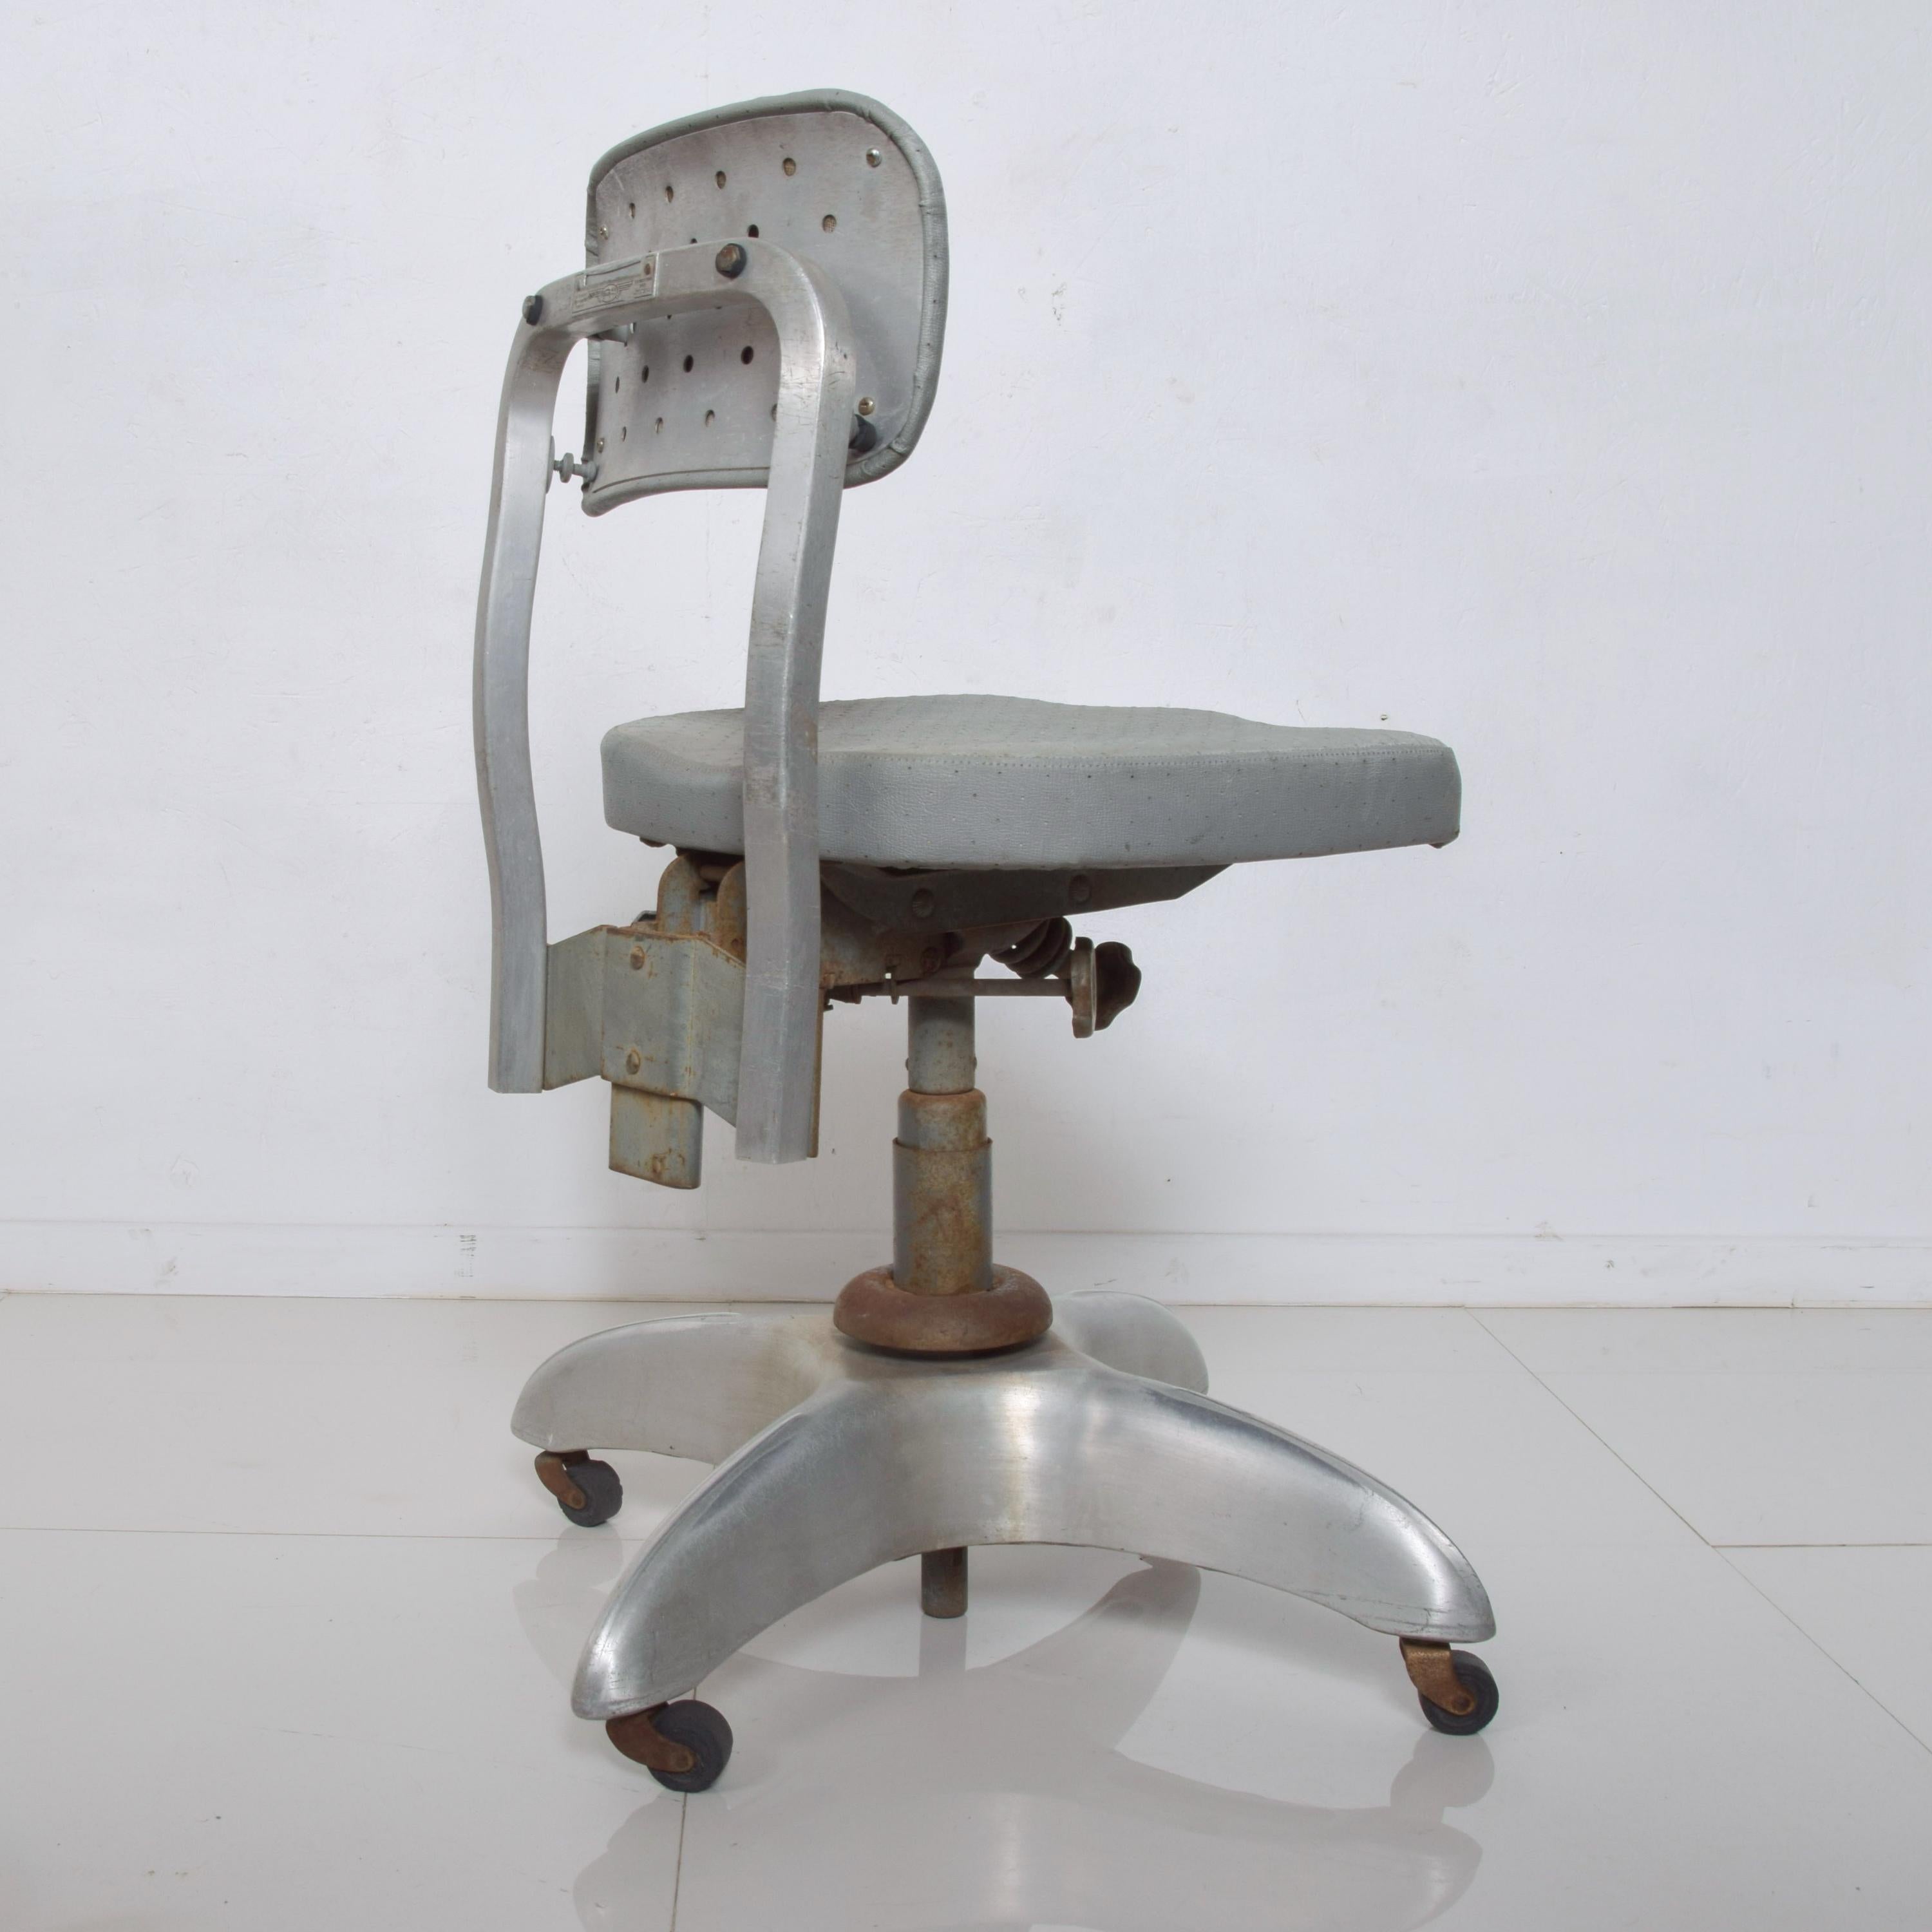 American Silver Office Tanker Desk Chair by Gio Ponti for Goodform 1950s For Sale